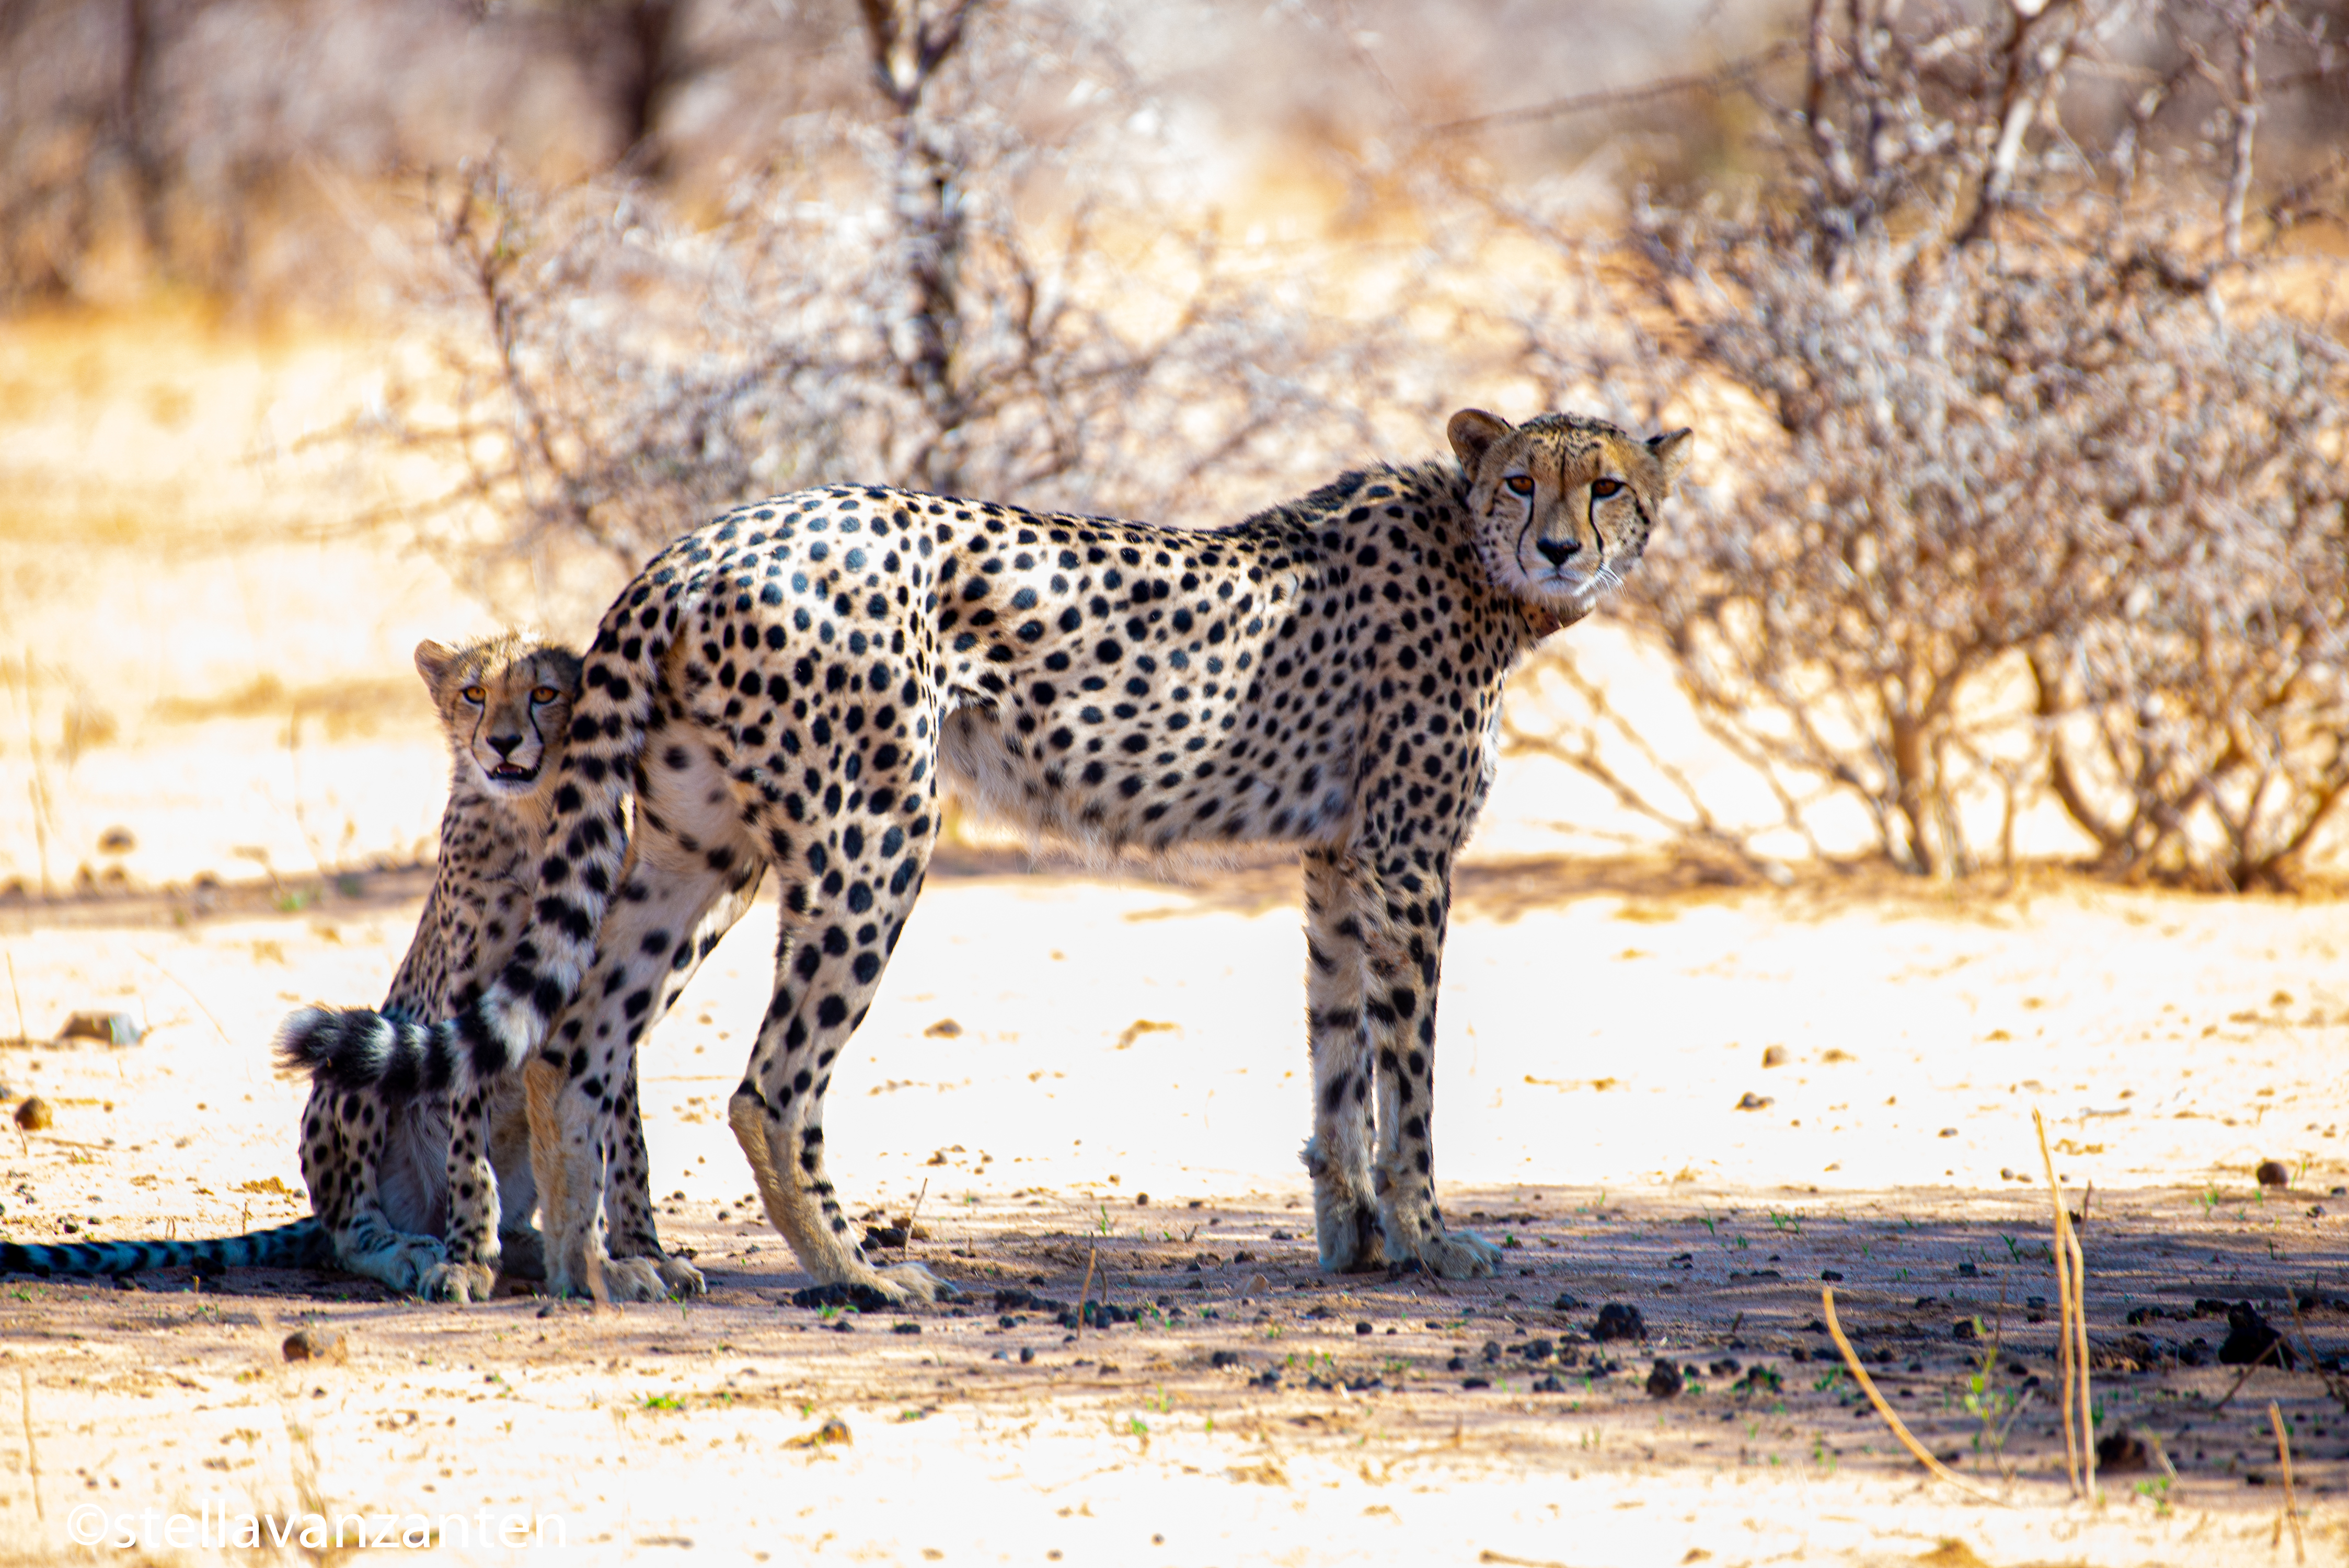 Cheetah mum with eight months old cub